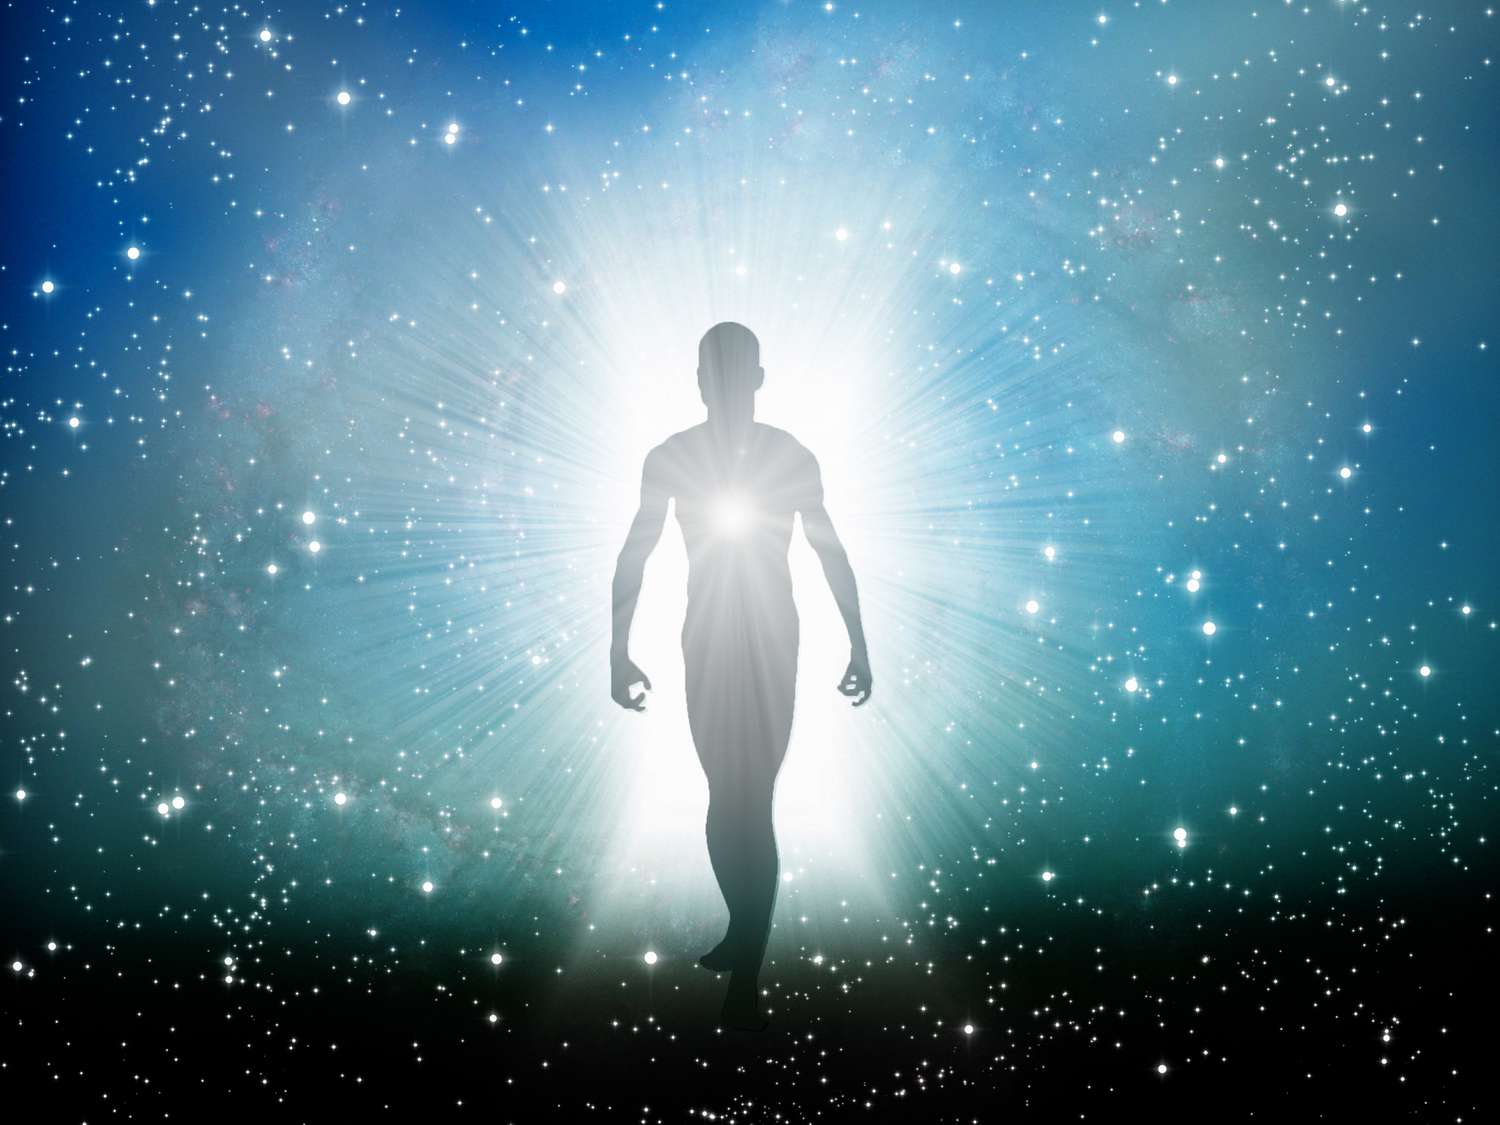 Reincarnation and the Cosmic Dream 